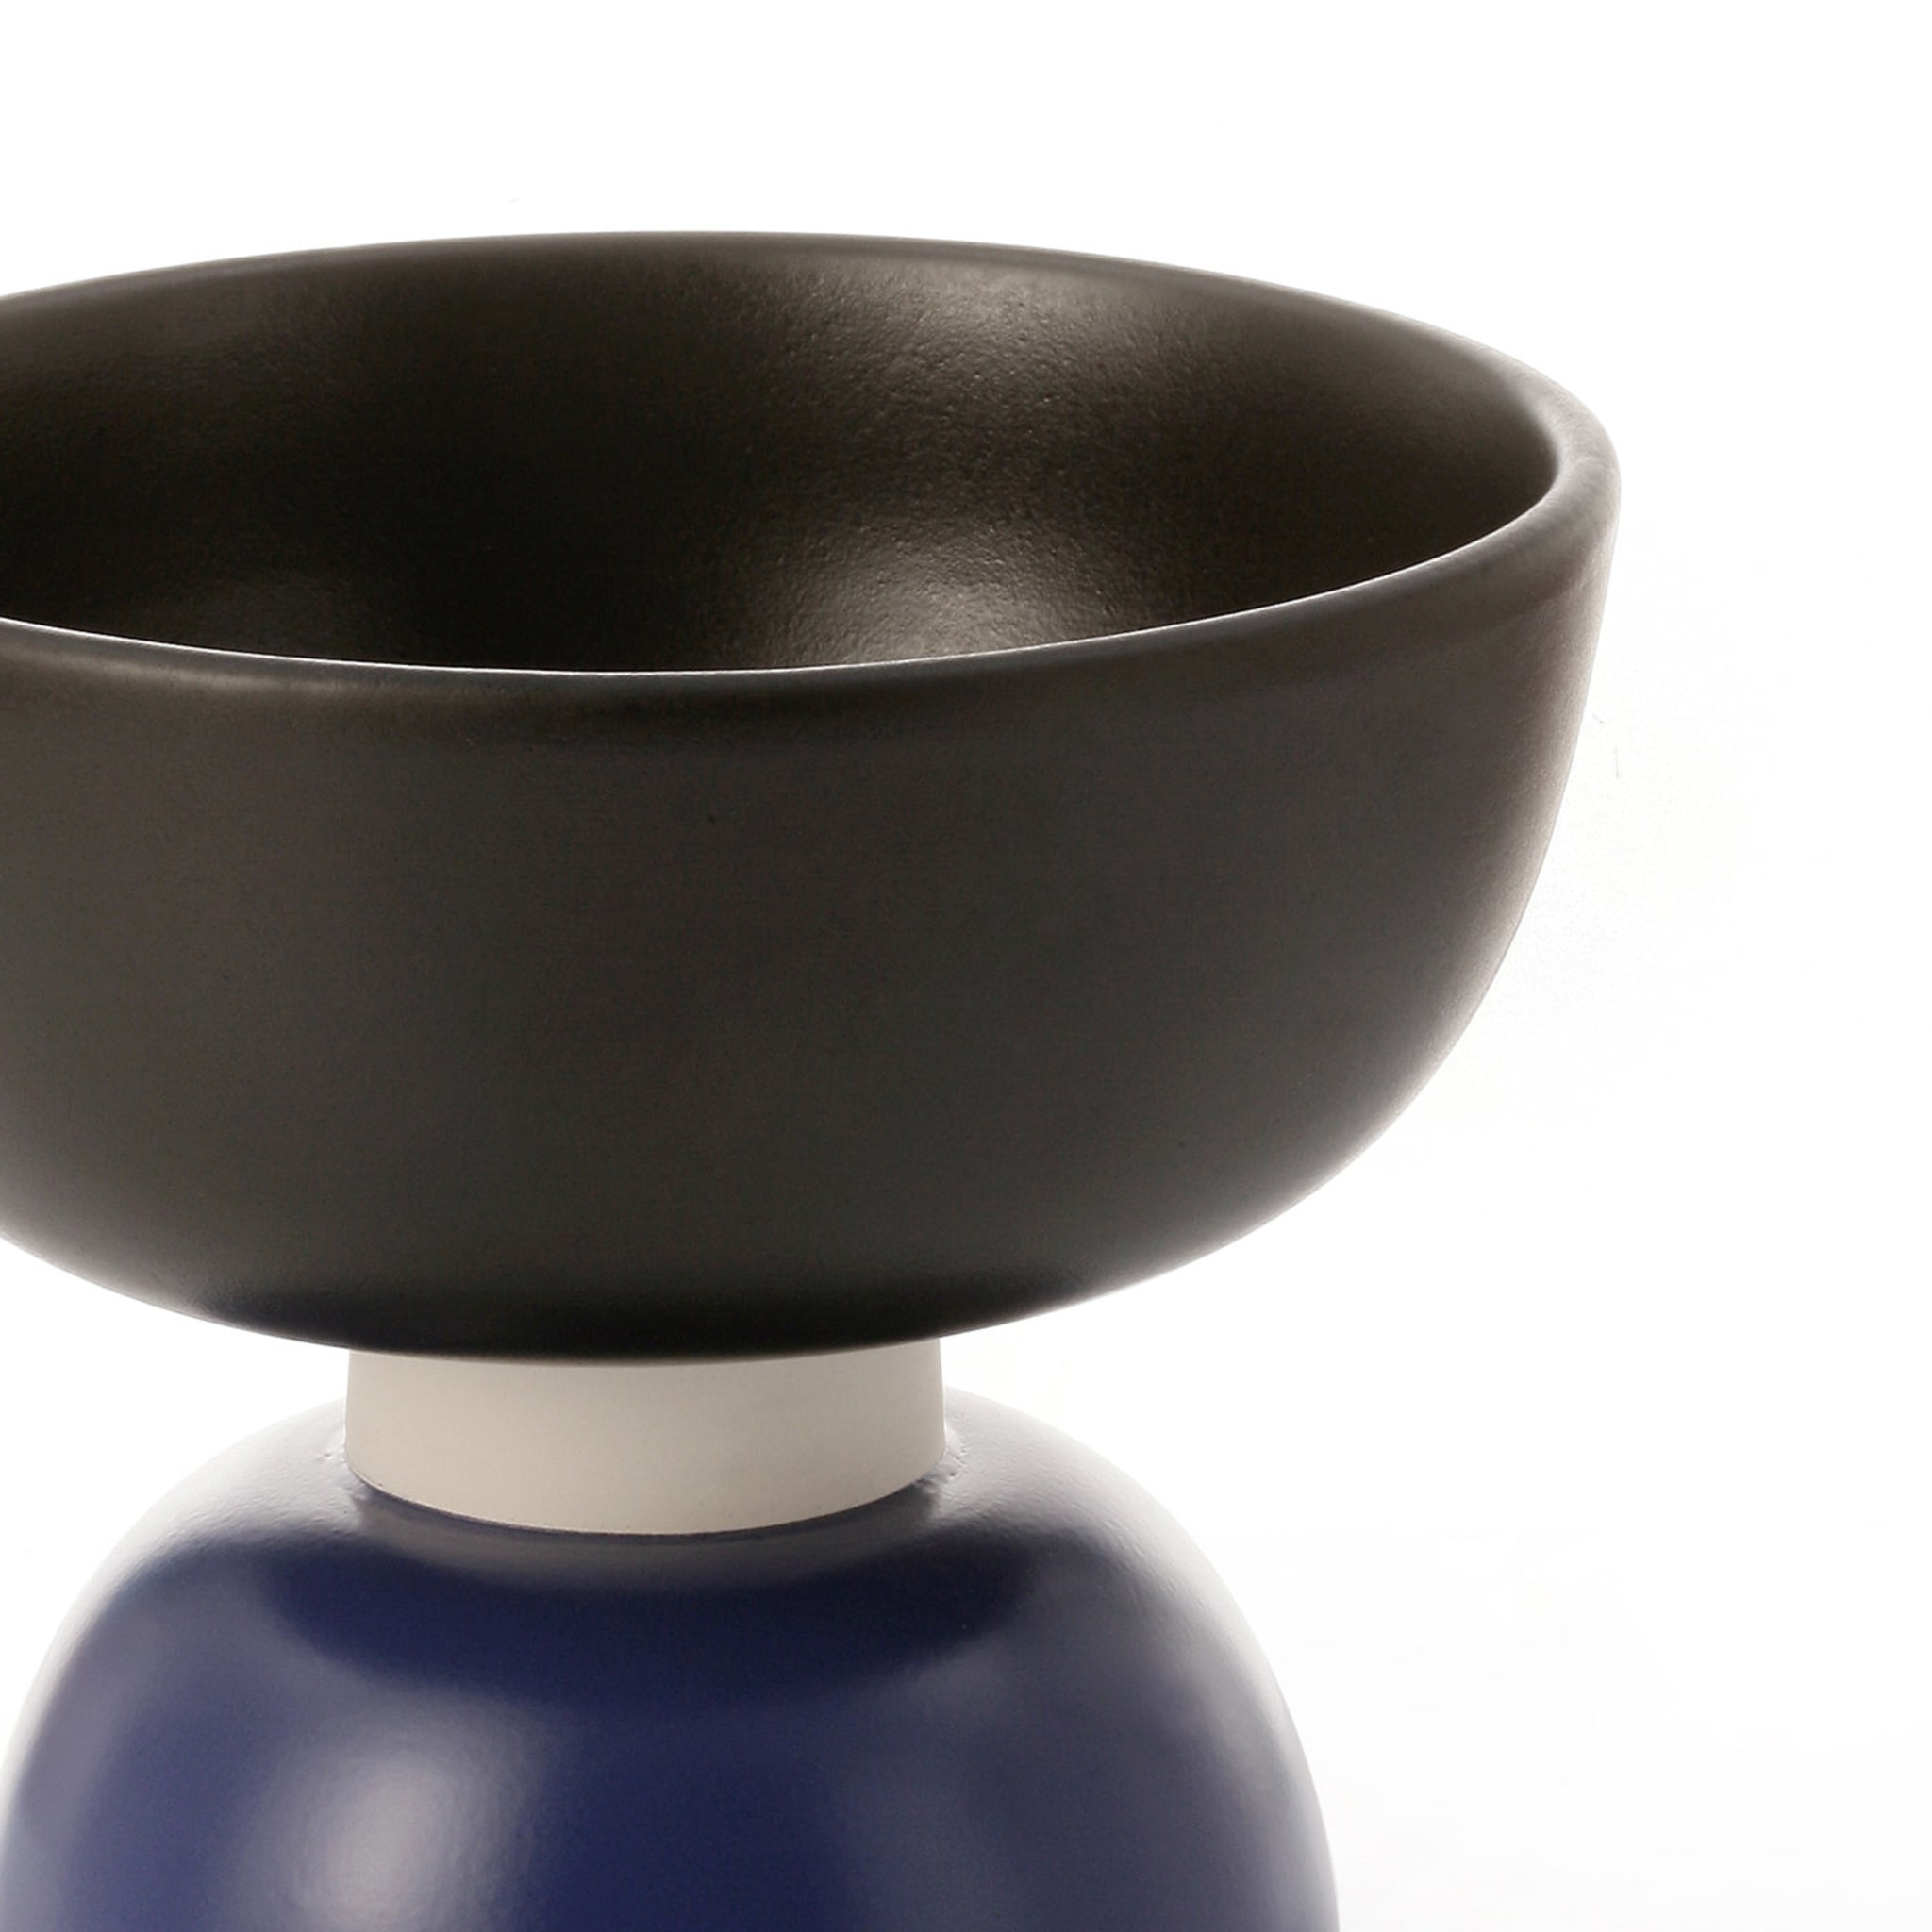 Small Centerpiece in Matte Black and Blue by Ettore Sottsass - Alternative view 1